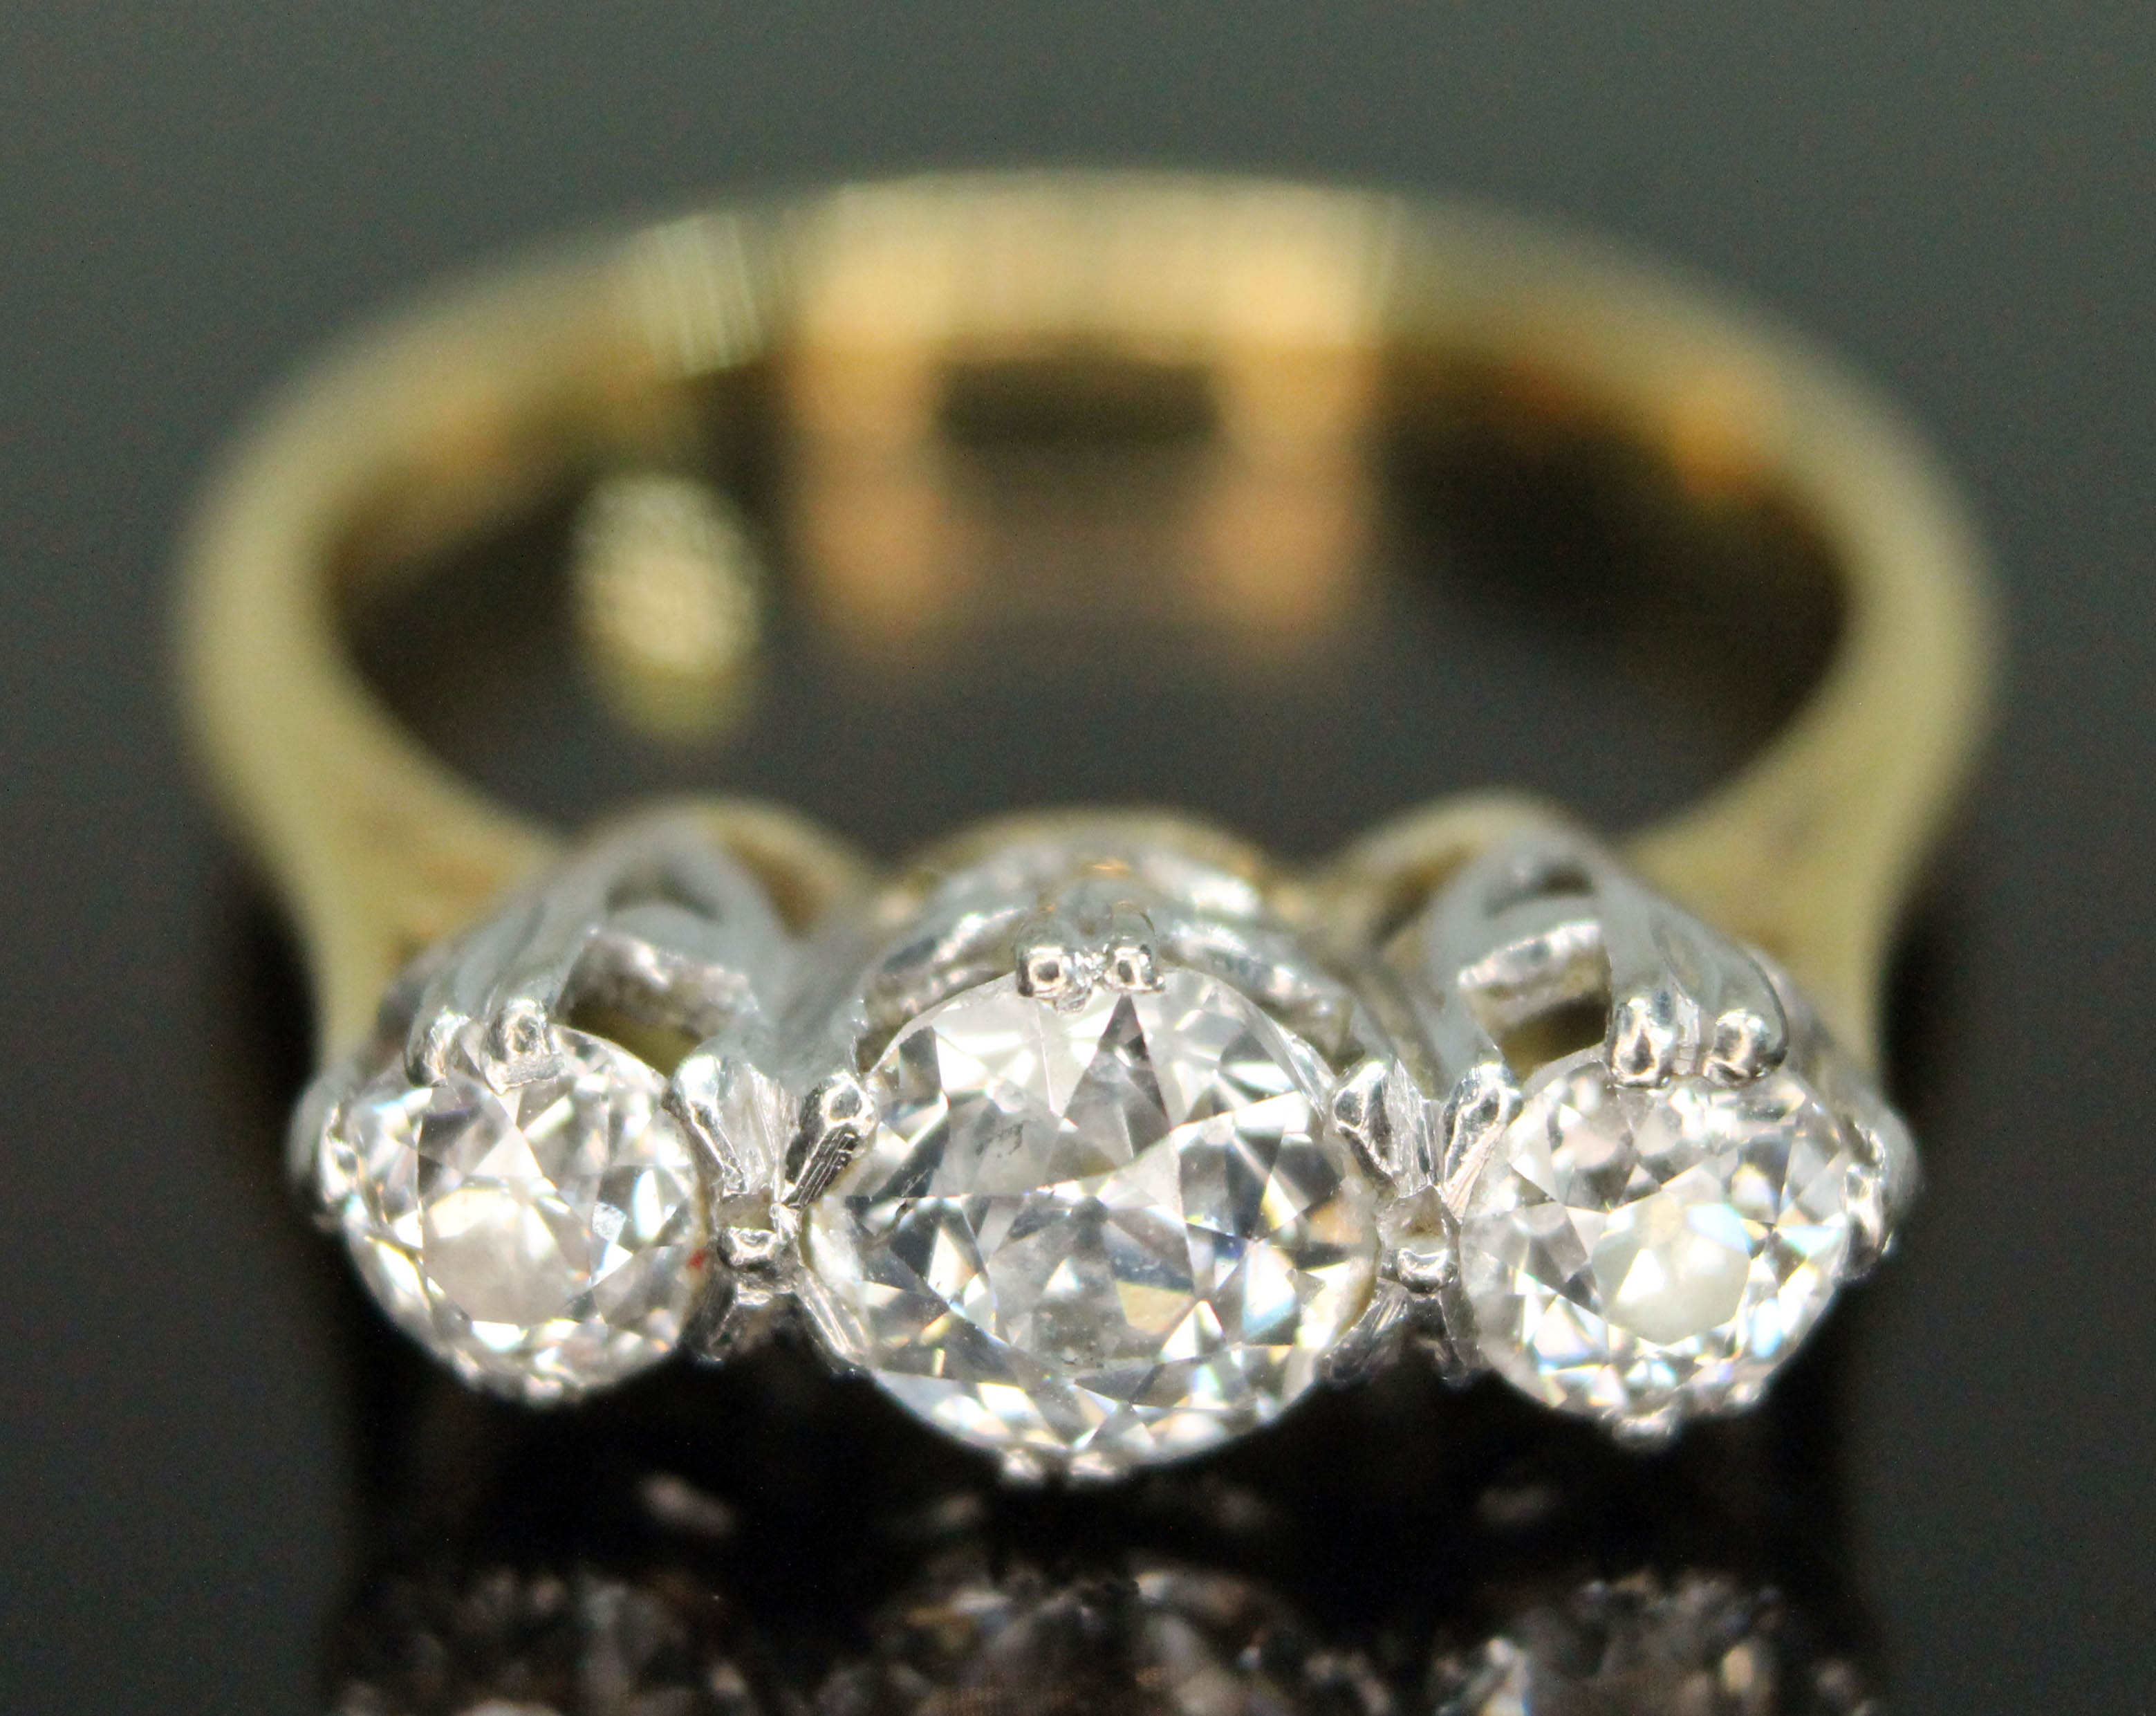 A three stone diamond ring, the Old European cut diamonds weighing approx. 0.30, 0.72 & 0.33 carats,